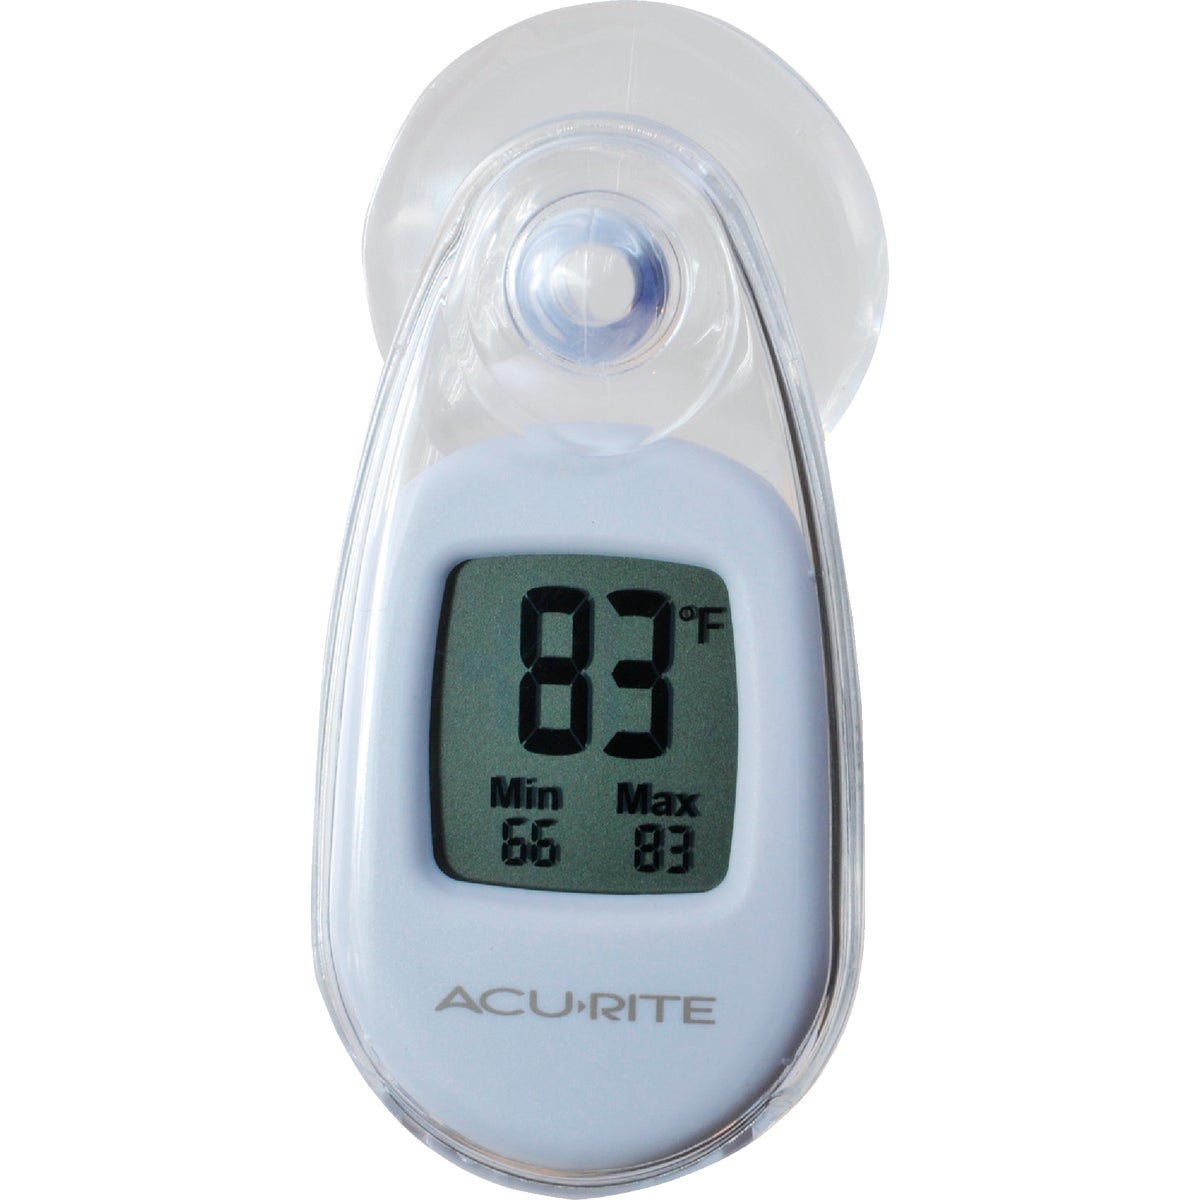 Item 632562, Strong suction-cup cling, indoor or outdoor thermometer.